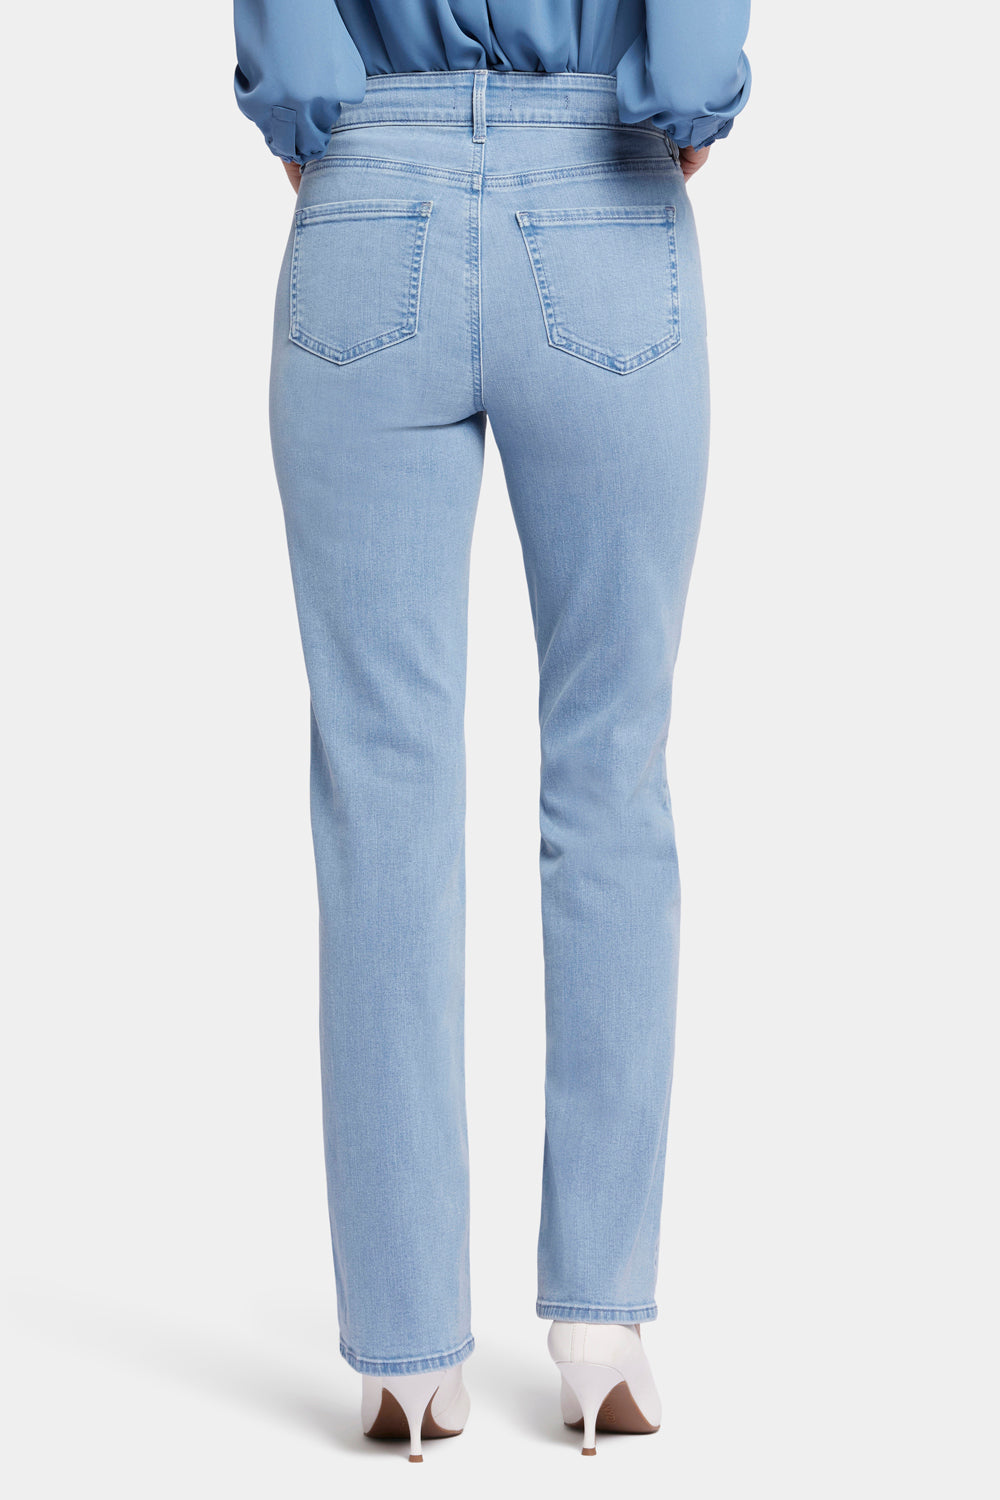 Levi's high waisted straight jeans in light wash blue